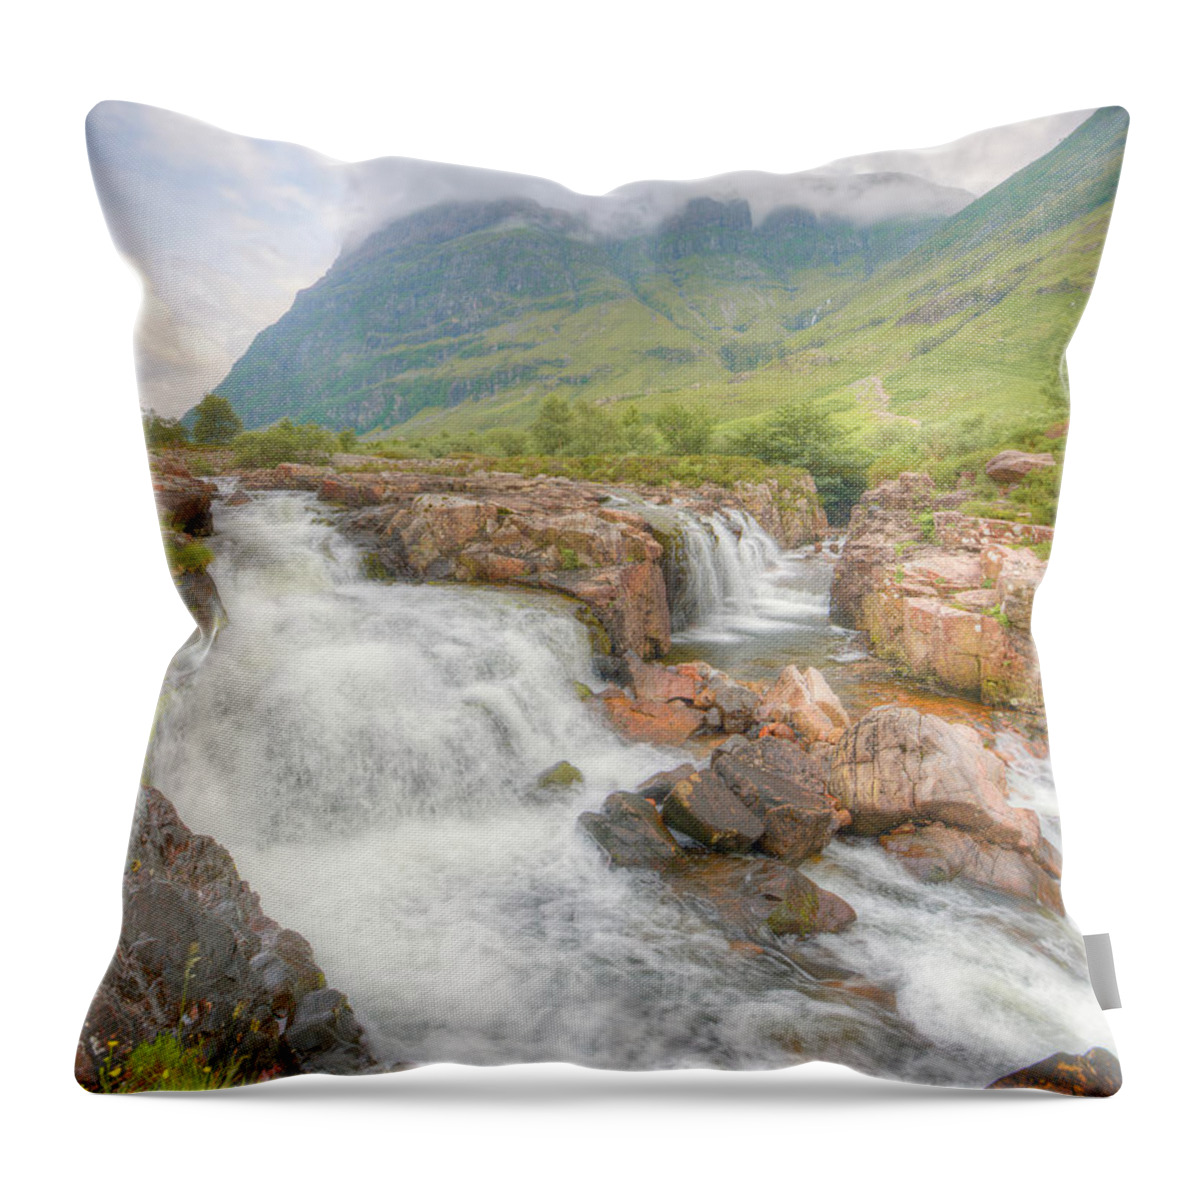 Glencoe Glen River Coe Waterfall Scottish Landscape Mountain Highlands Scotland Throw Pillow featuring the photograph Glencoe and the River Coe by Ray Devlin